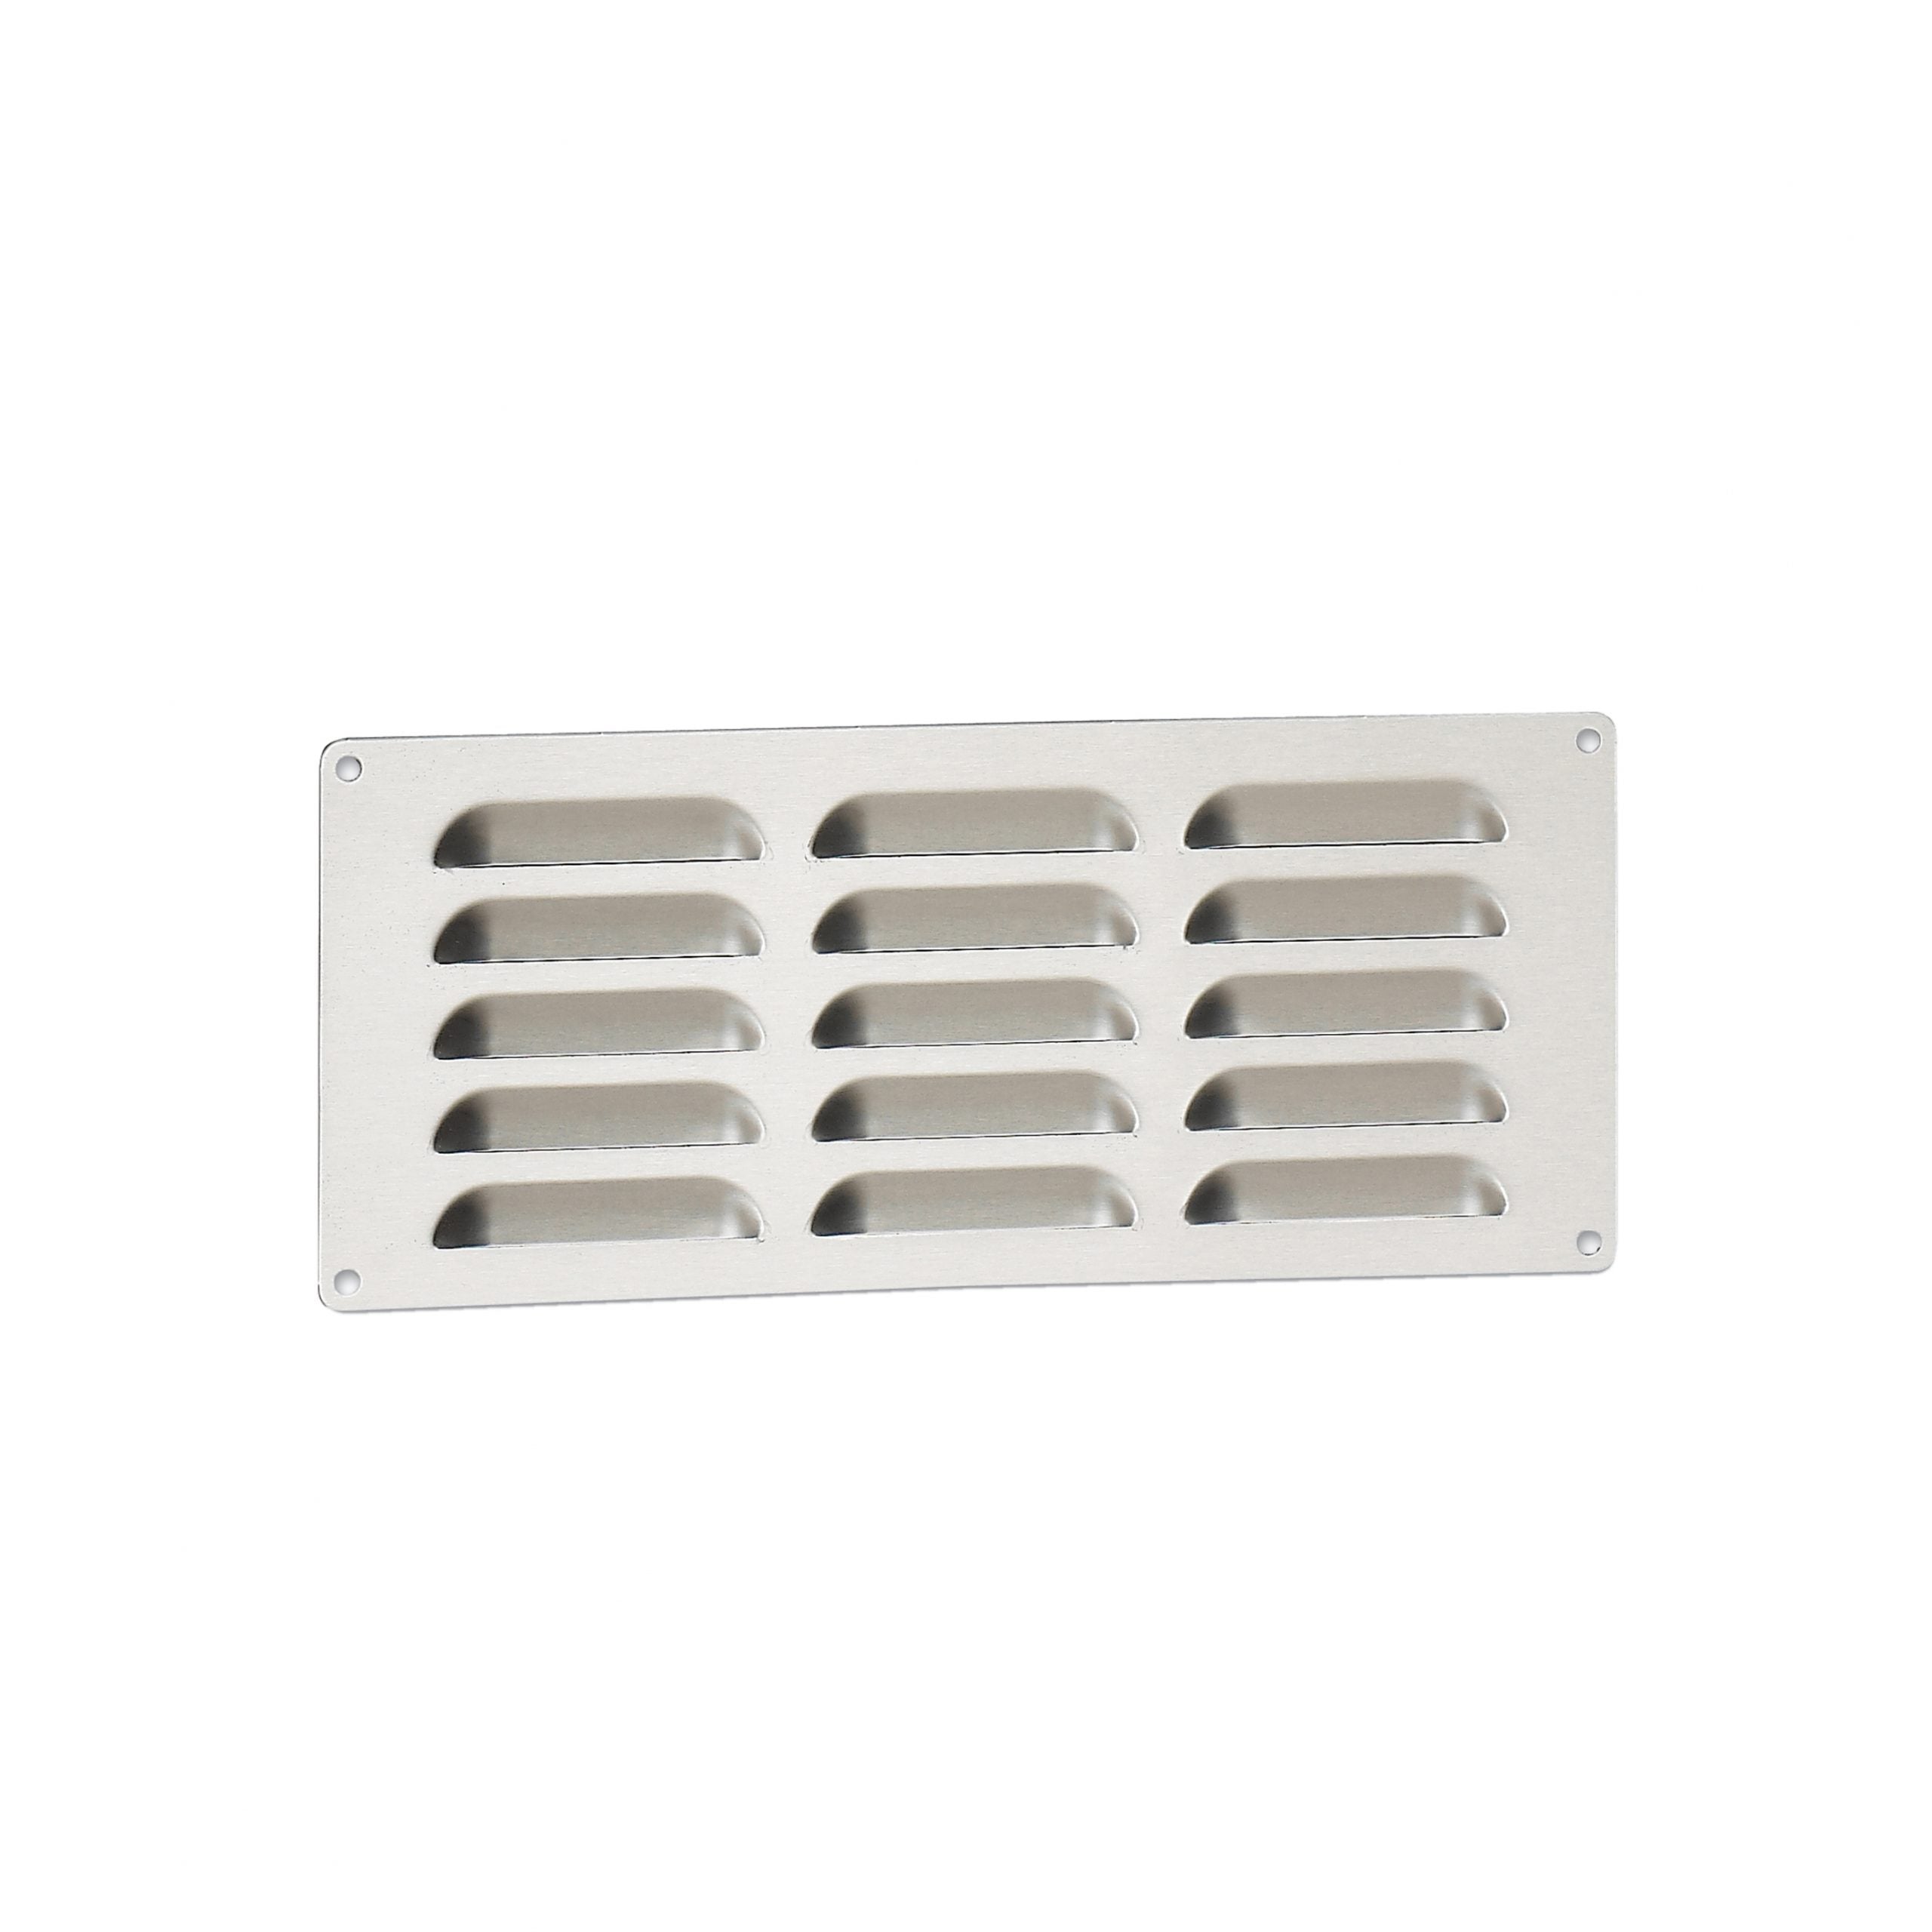 Louvered Stainless Steel Venting Panel - Fire Magic